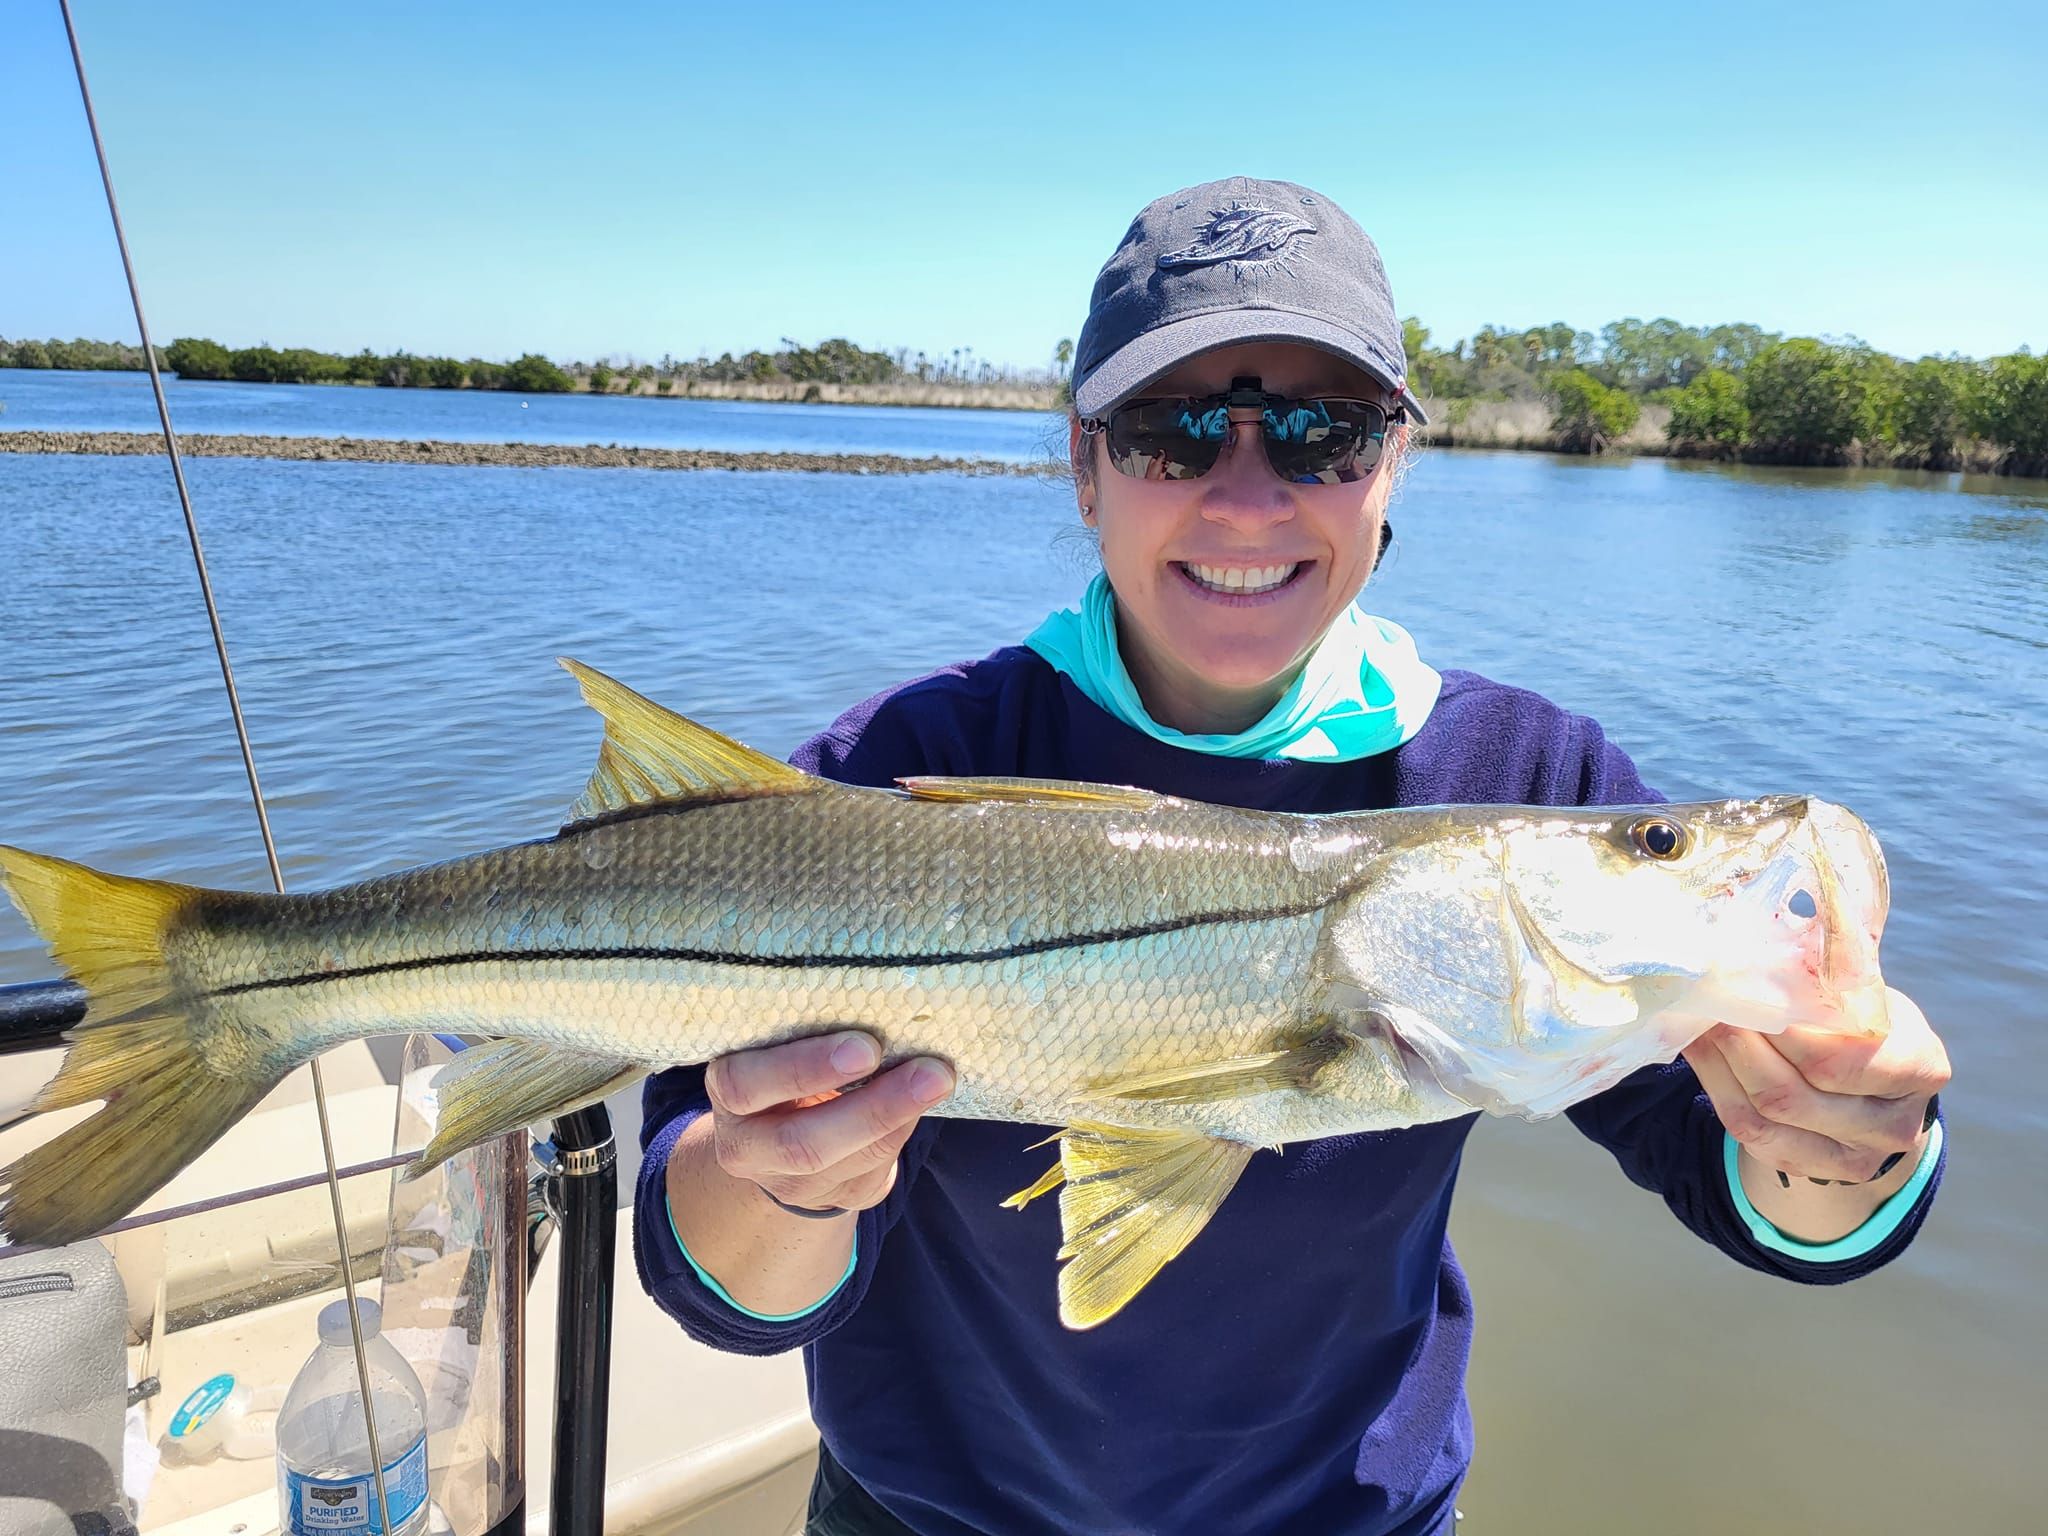 Great Snook fish! Caught on cam